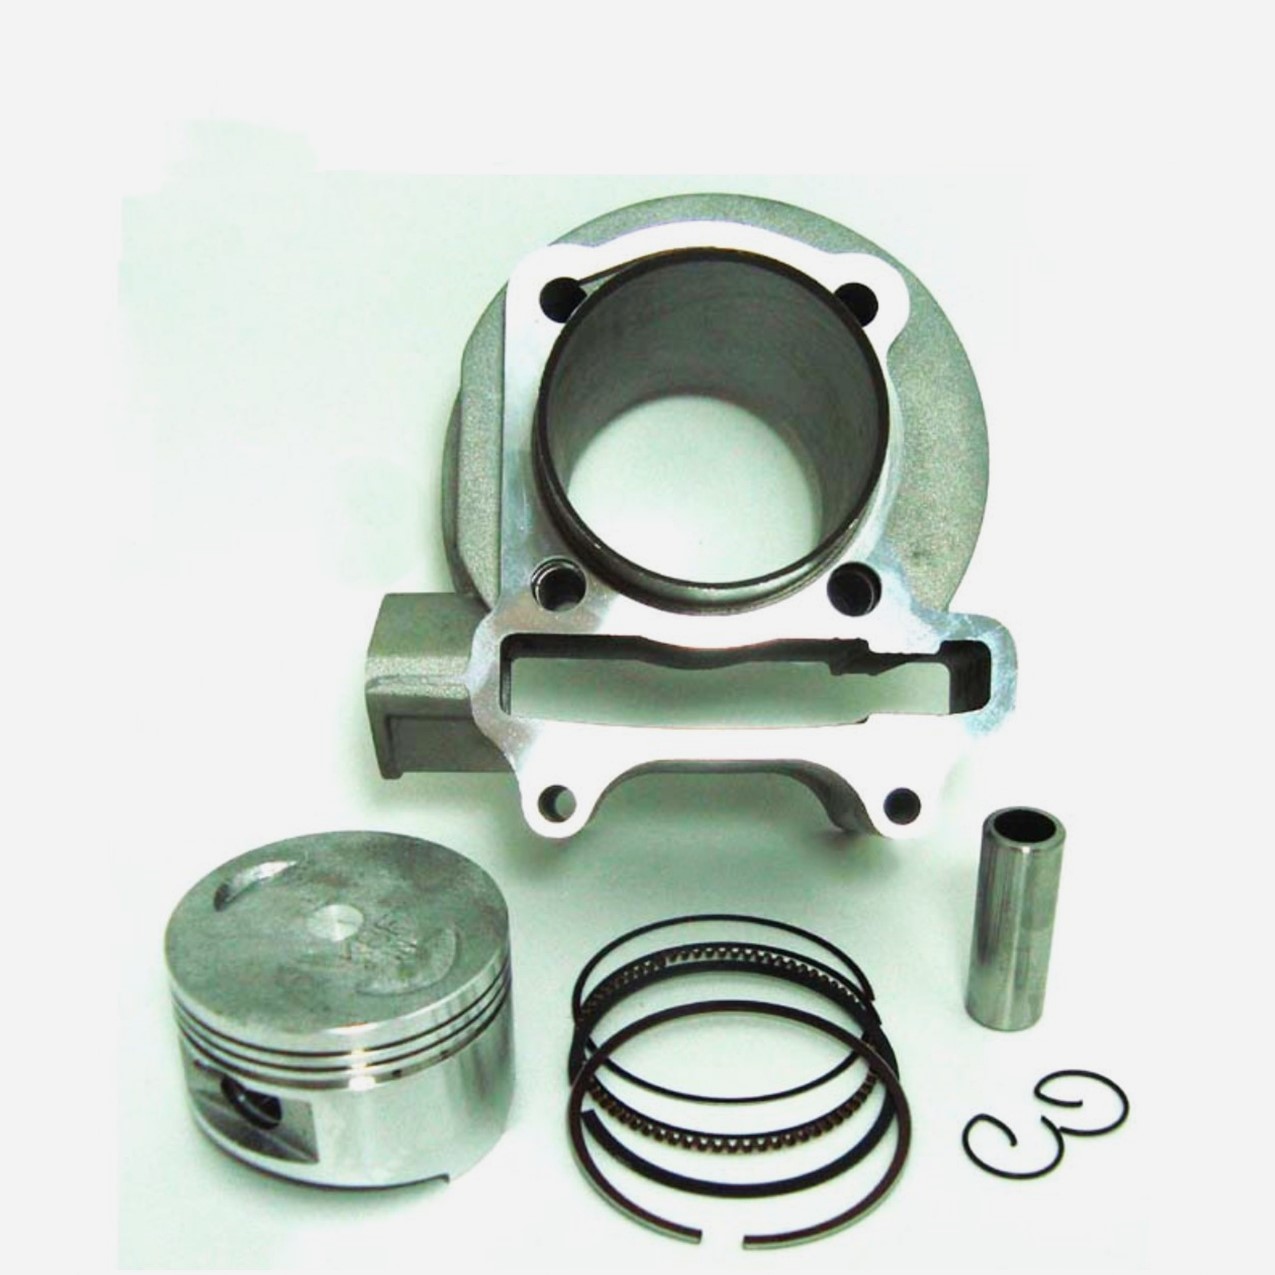 Cylinder Piston Top End Kit 180cc 4 Stroke GY6-180 ATVs, GoKarts, Scooters TYPE 1 BOLT PATTERN B=61 H=69 NOTE:Cyl Skirt OD=65 May require opening crankcase, check before ordering.